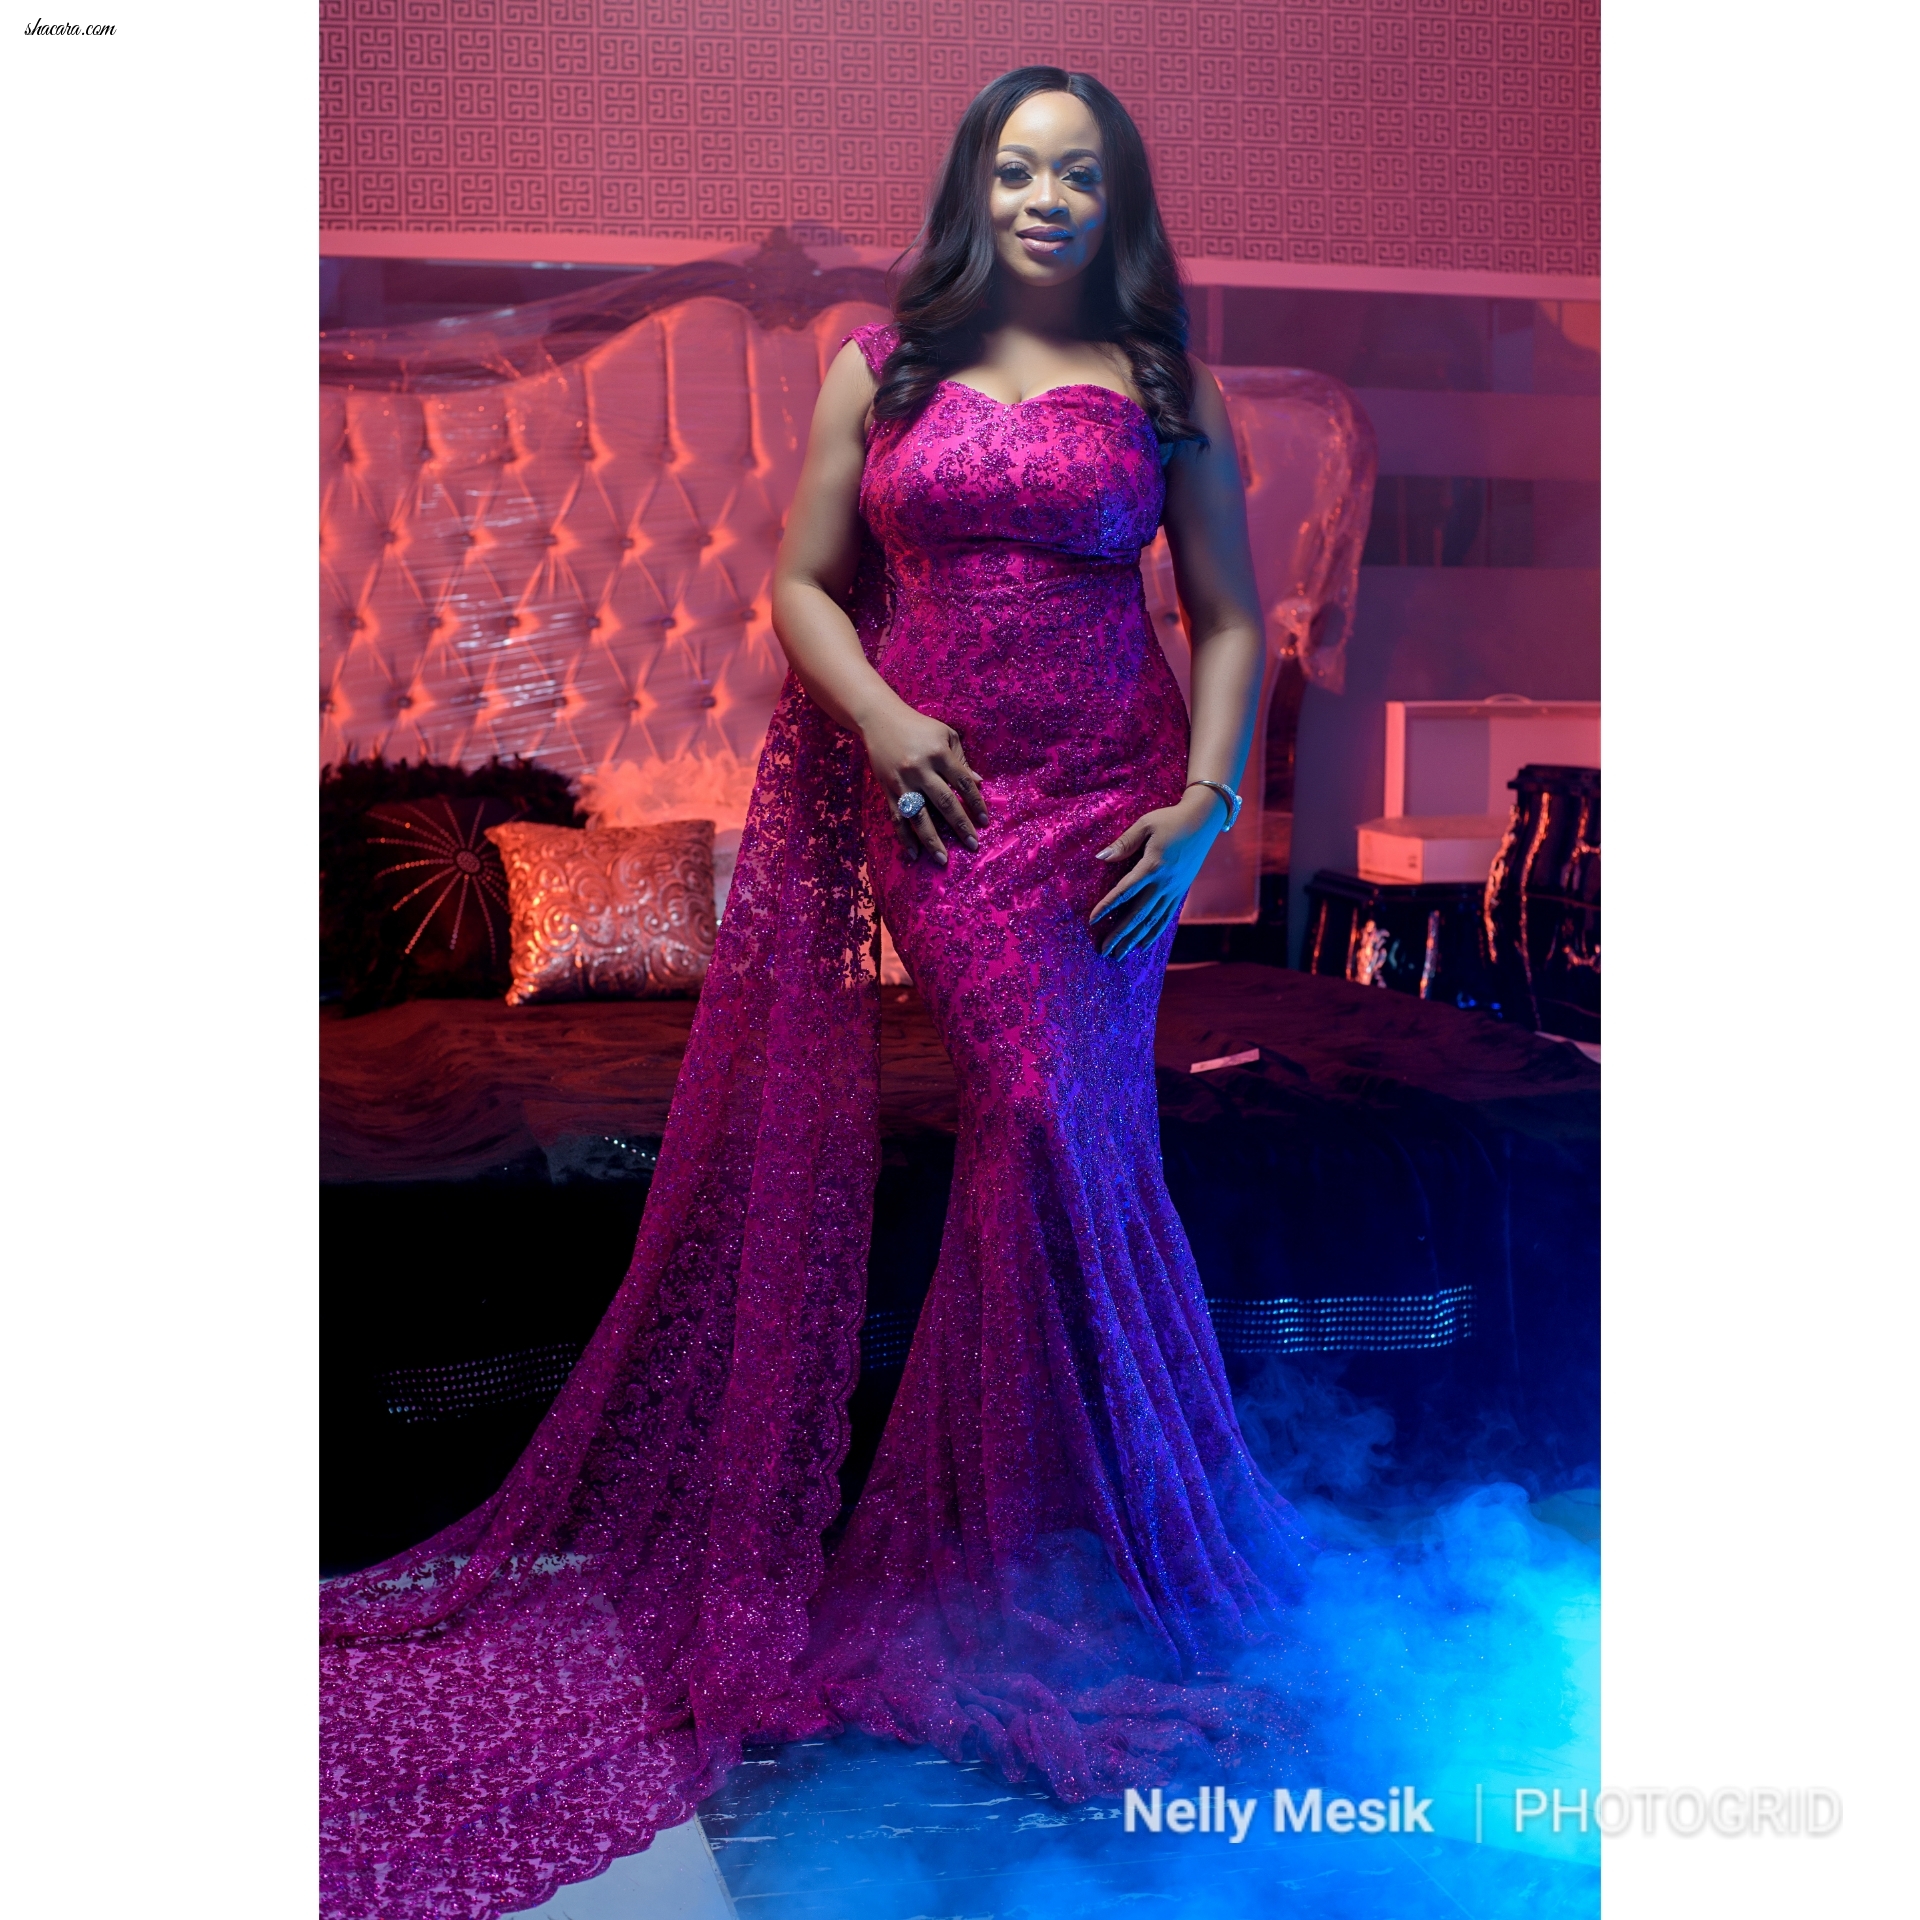 Swanky Jerry, Sari Signature, Tolu Bally & Belle Bedazzled Cover This Week’s Vanguard Allure